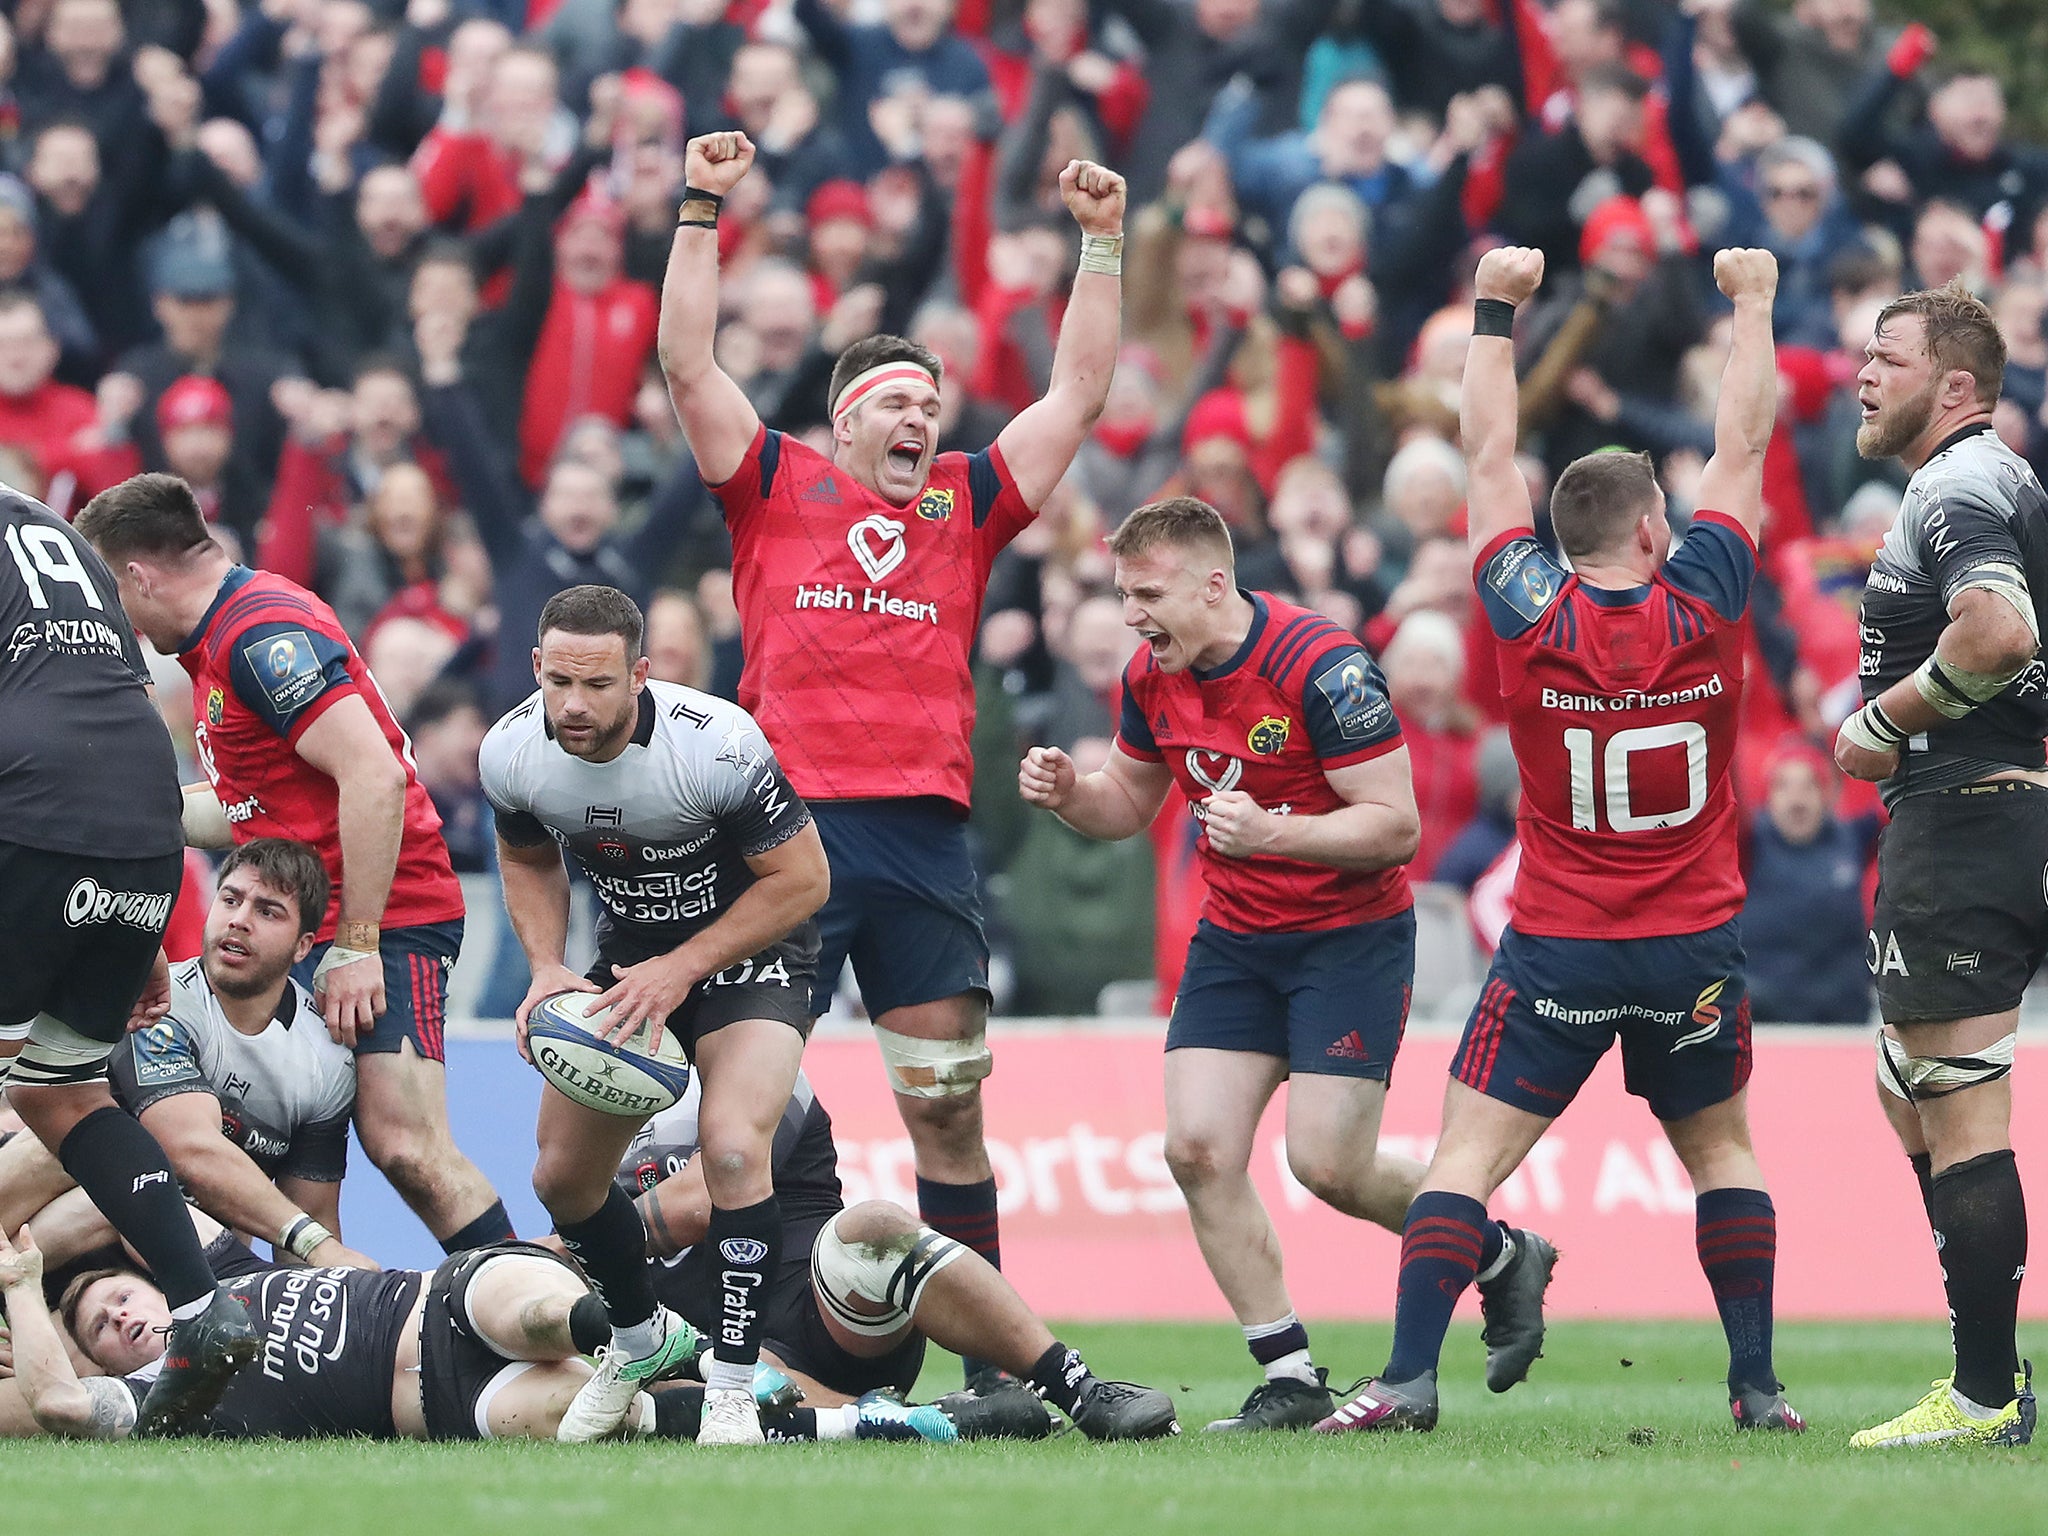 Munster will face either Clermont Auvergne or Racing 92 in the semi-finals